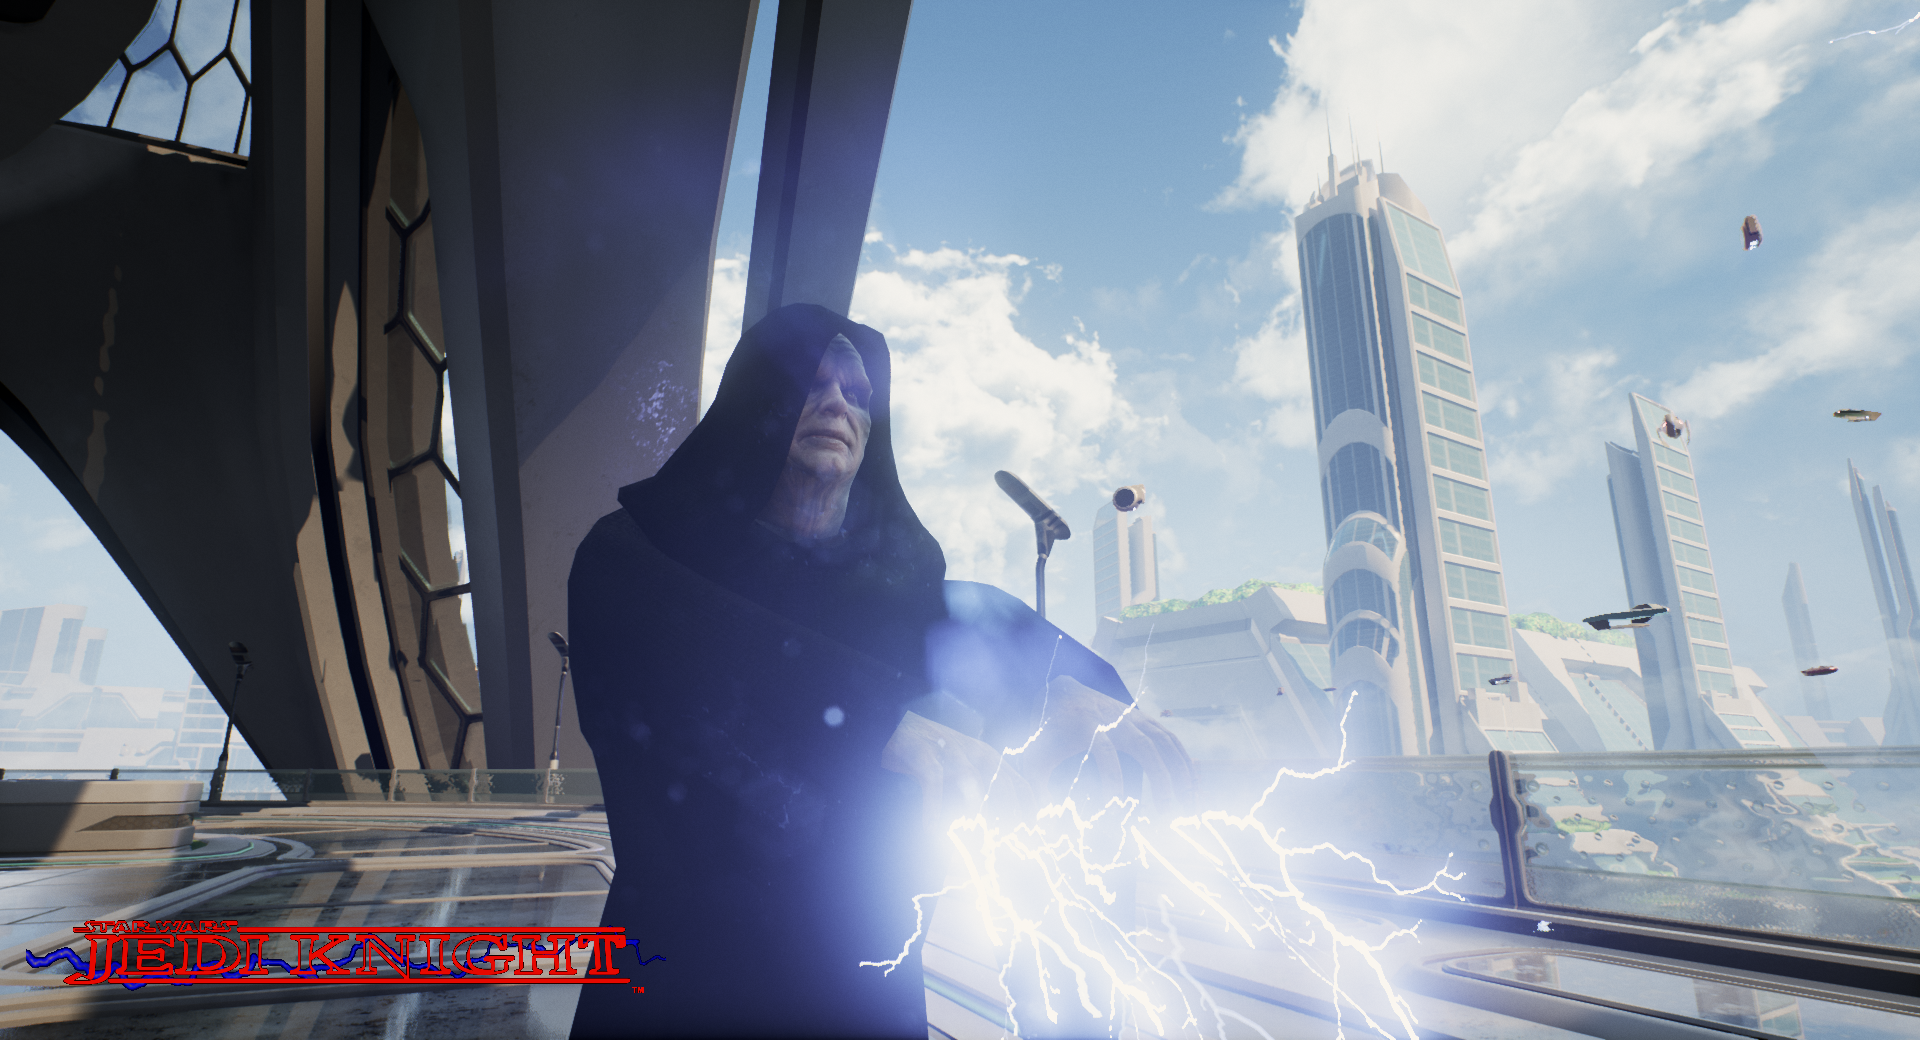 More information about "Wallpaper of Jedi Knight in UE4 V0.2"